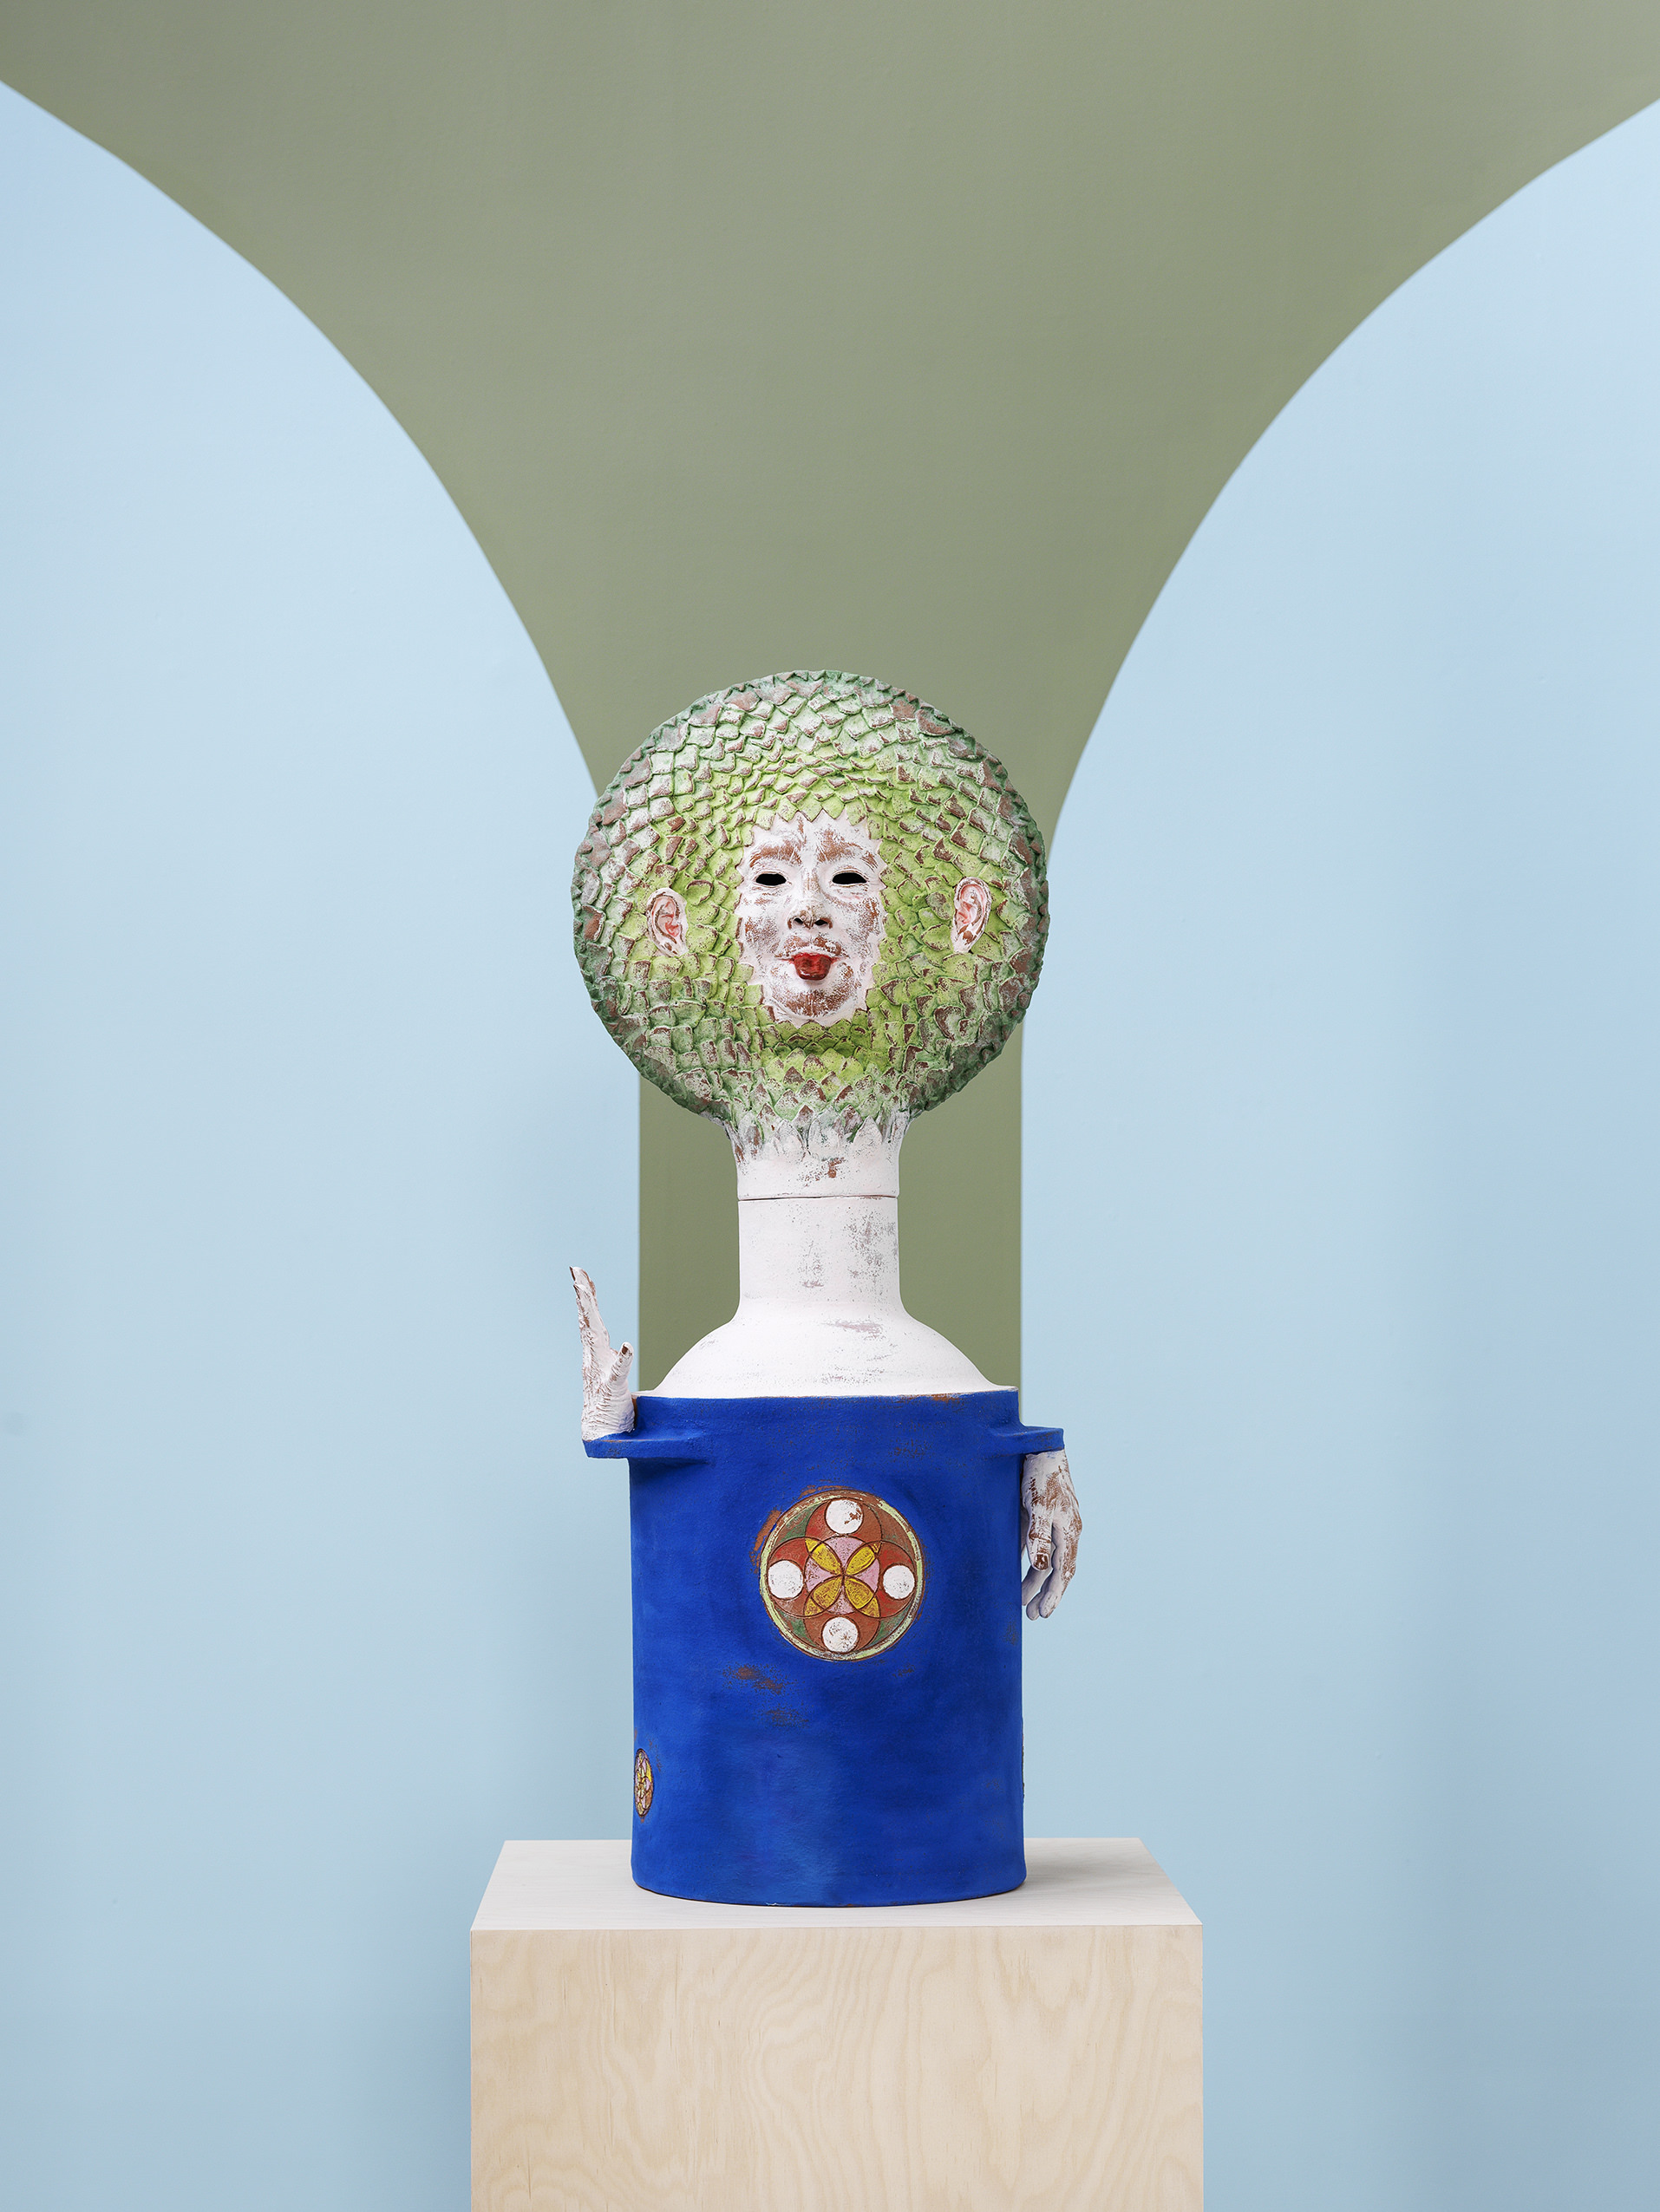 Sculpture on a plinth imitating a flower, with a blue pot and a green face, sticking its tongue out